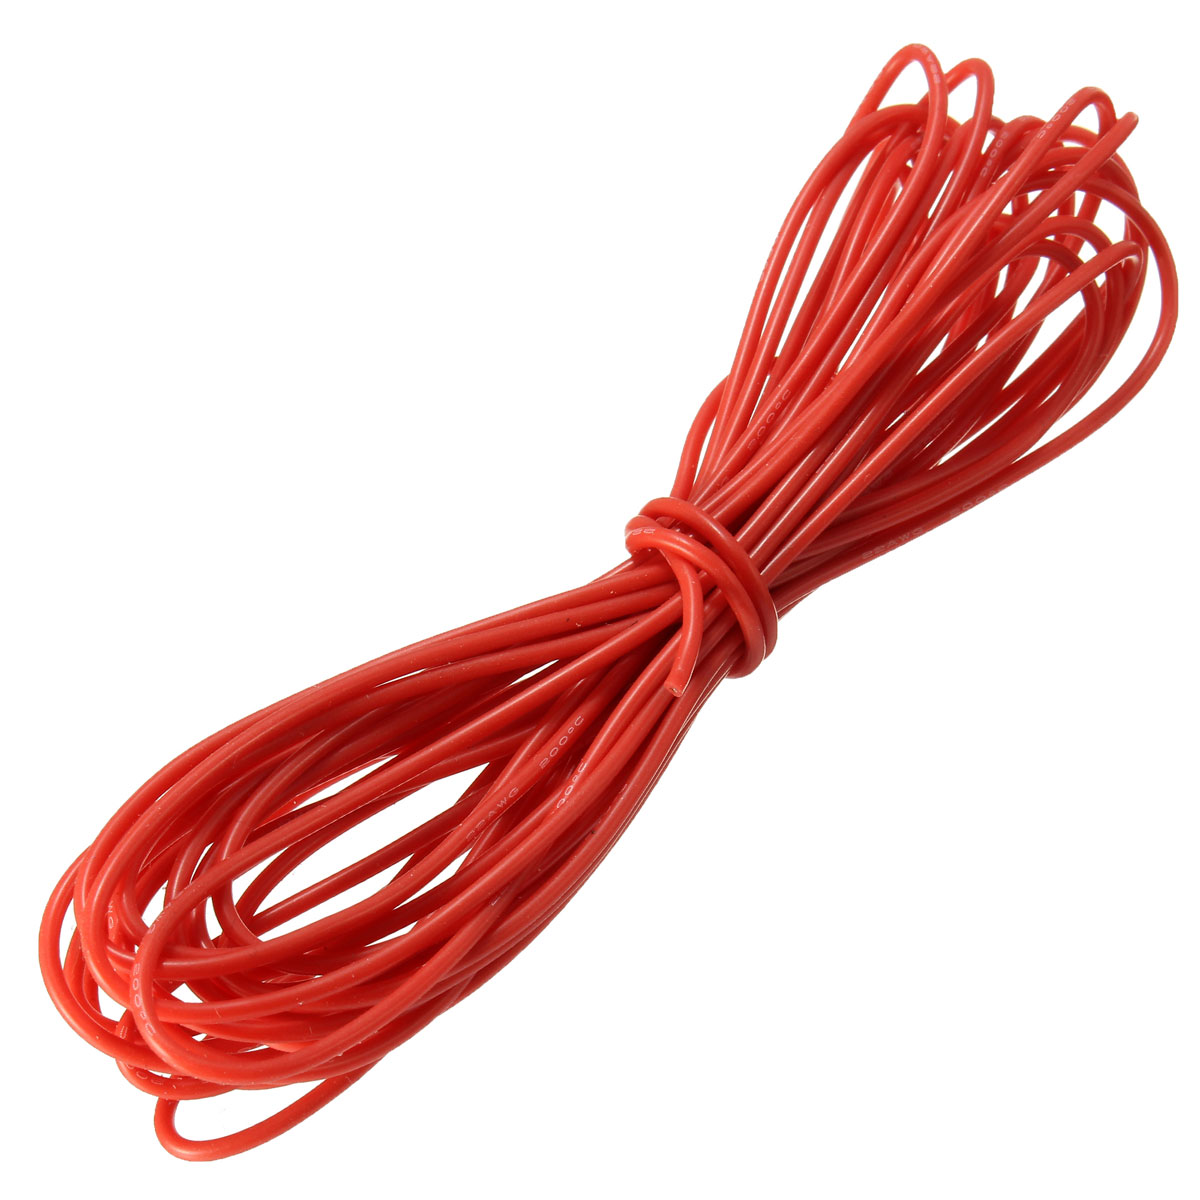 DANIU-10-Meter-Red-Silicone-Wire-Cable-10121416182022AWG-Flexible-Cable-1170297-4